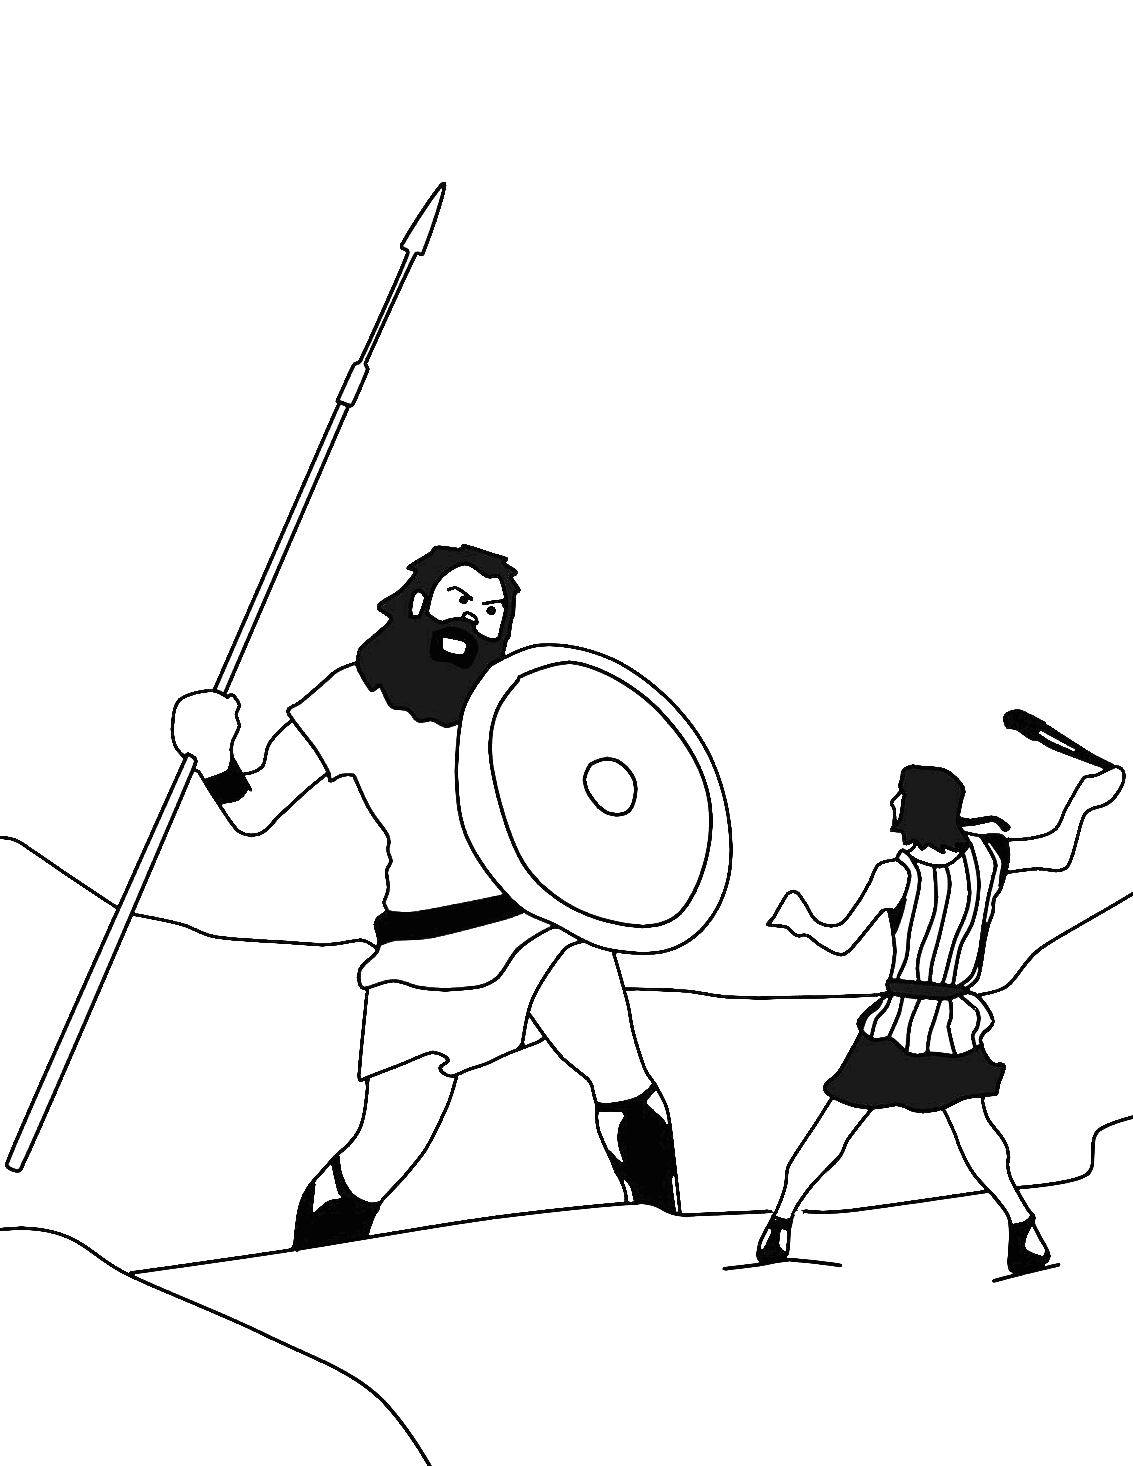 David And Goliath Fighting Coloring Page Free Printable Coloring Pages For Kids